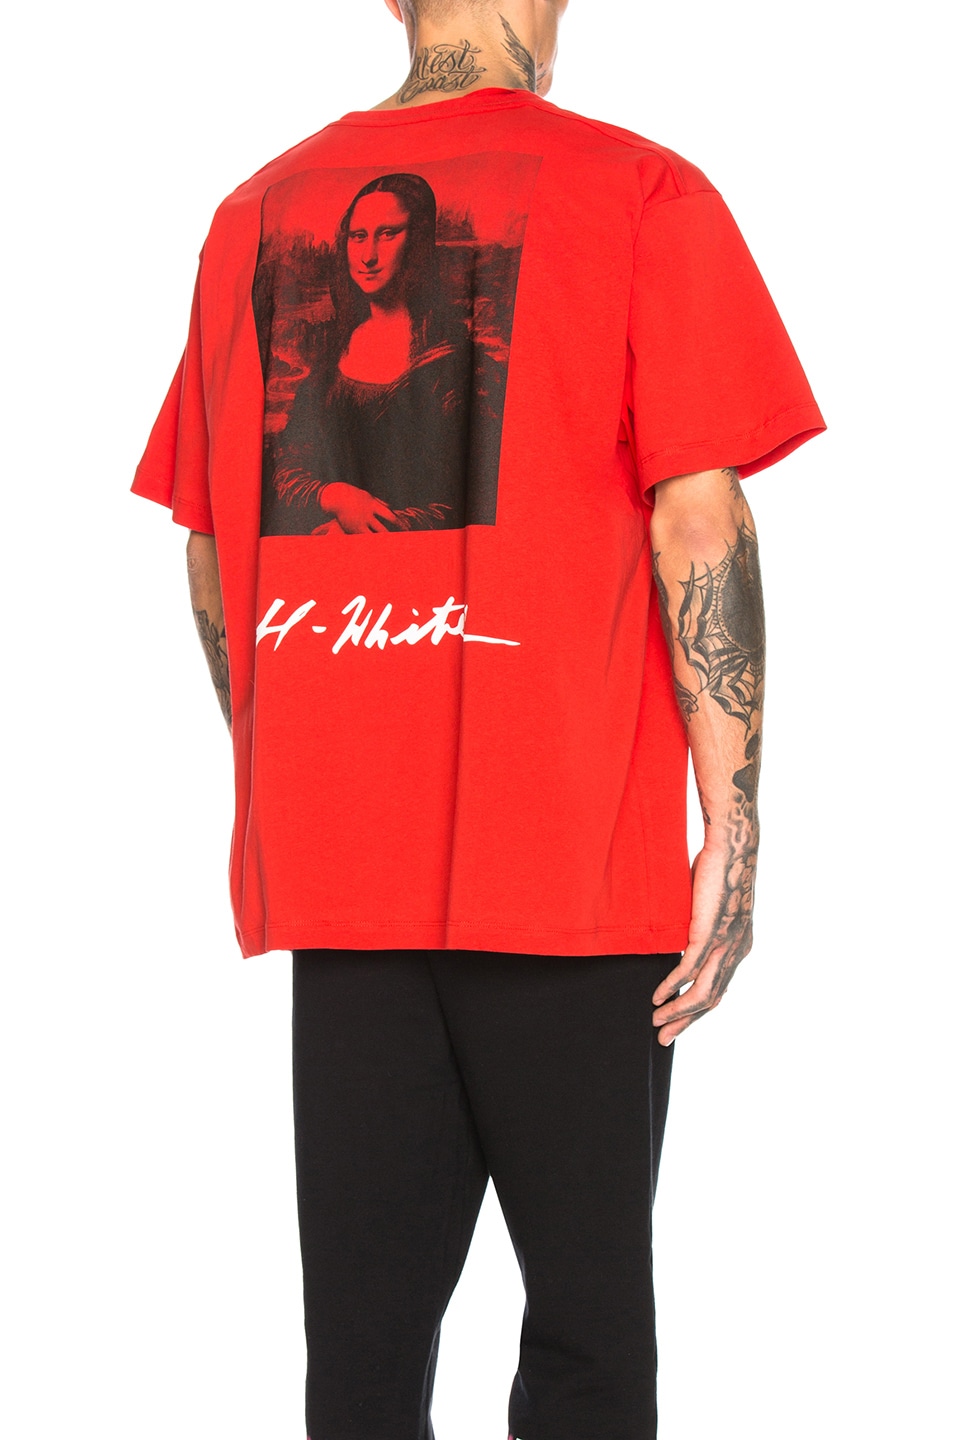 Image 1 of OFF-WHITE Mona Lisa Graphic Tee in Red & Black